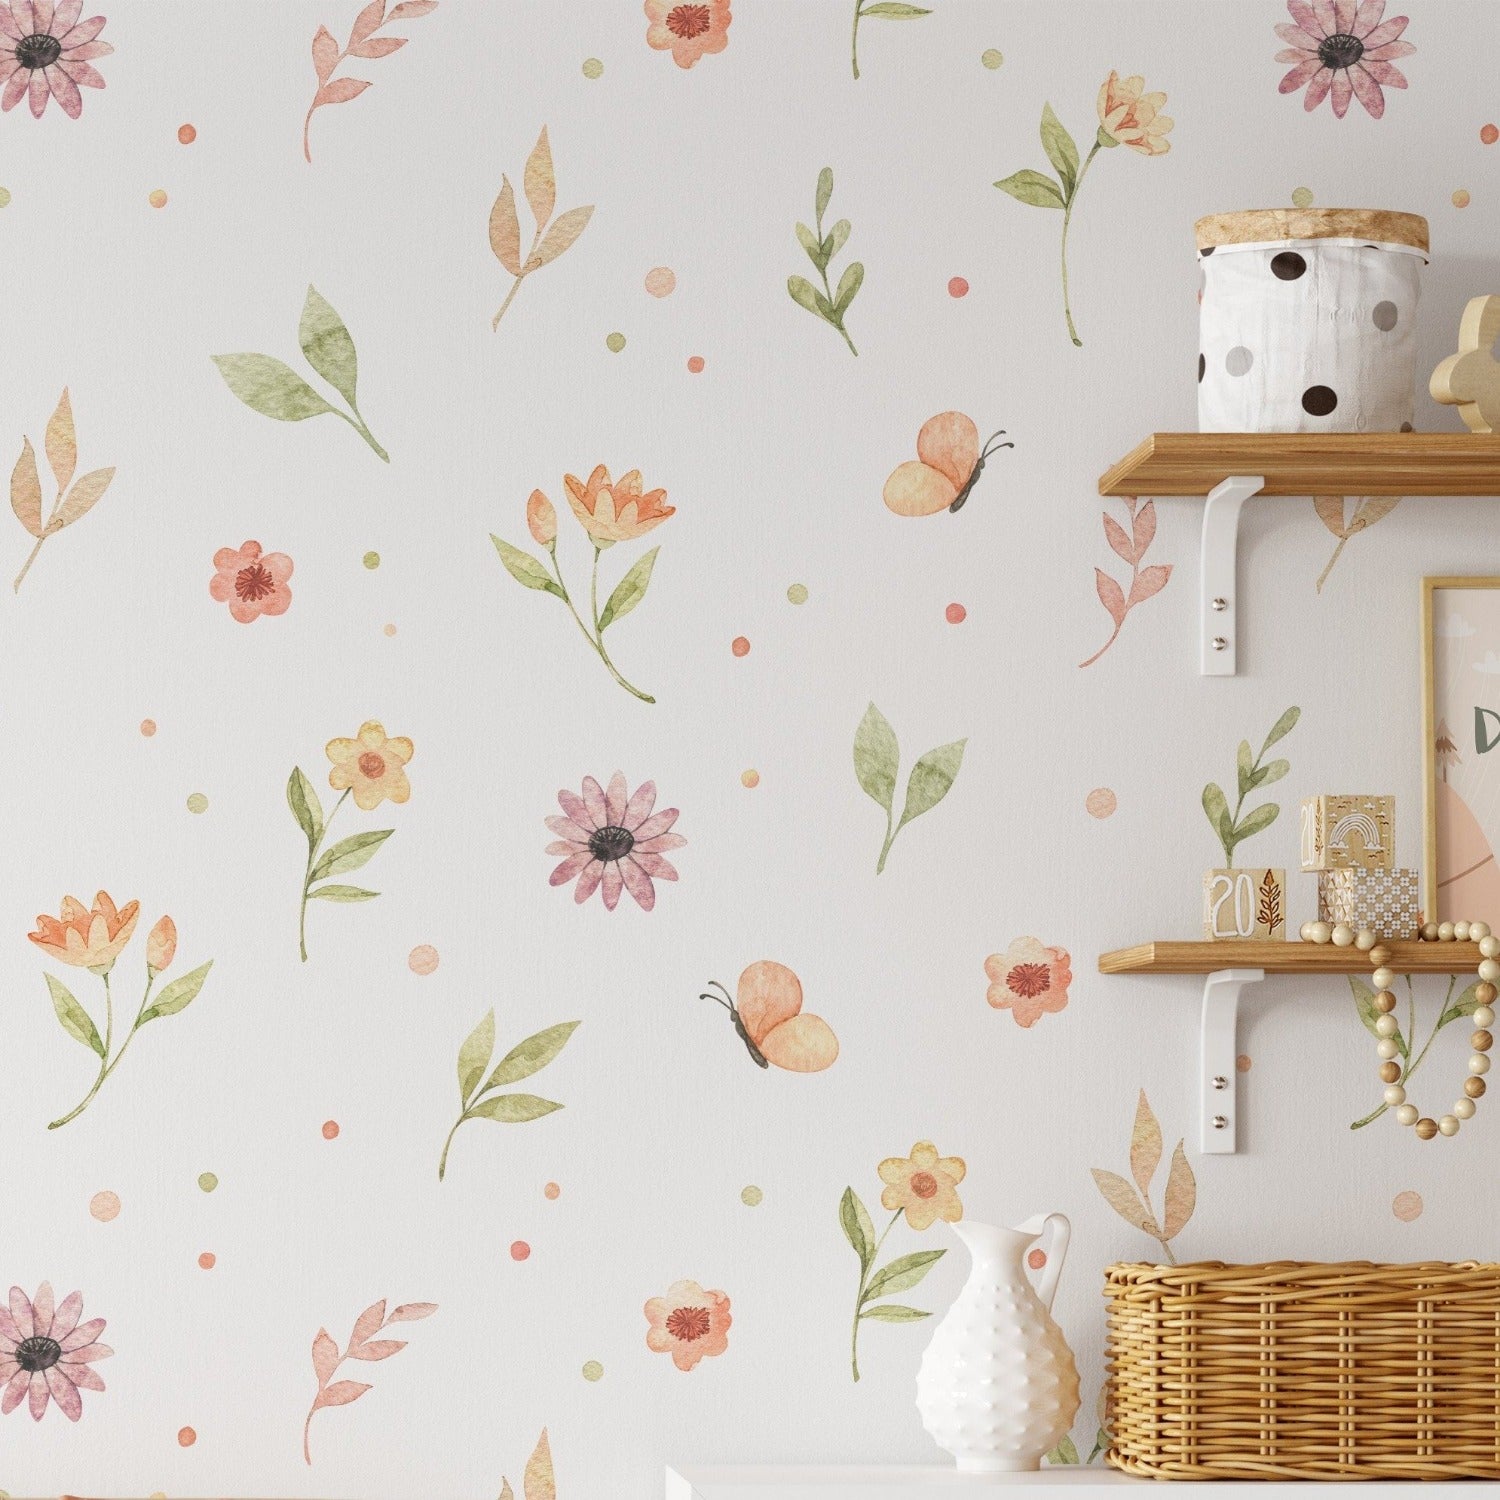 The 'Butterfly and Flower Wallpaper' is featured in a well-decorated room, providing a cheerful backdrop to a wooden shelf adorned with various decorative items. The wallpaper's pattern of pastel-colored botanicals and butterflies contributes to the room's bright and airy feel.